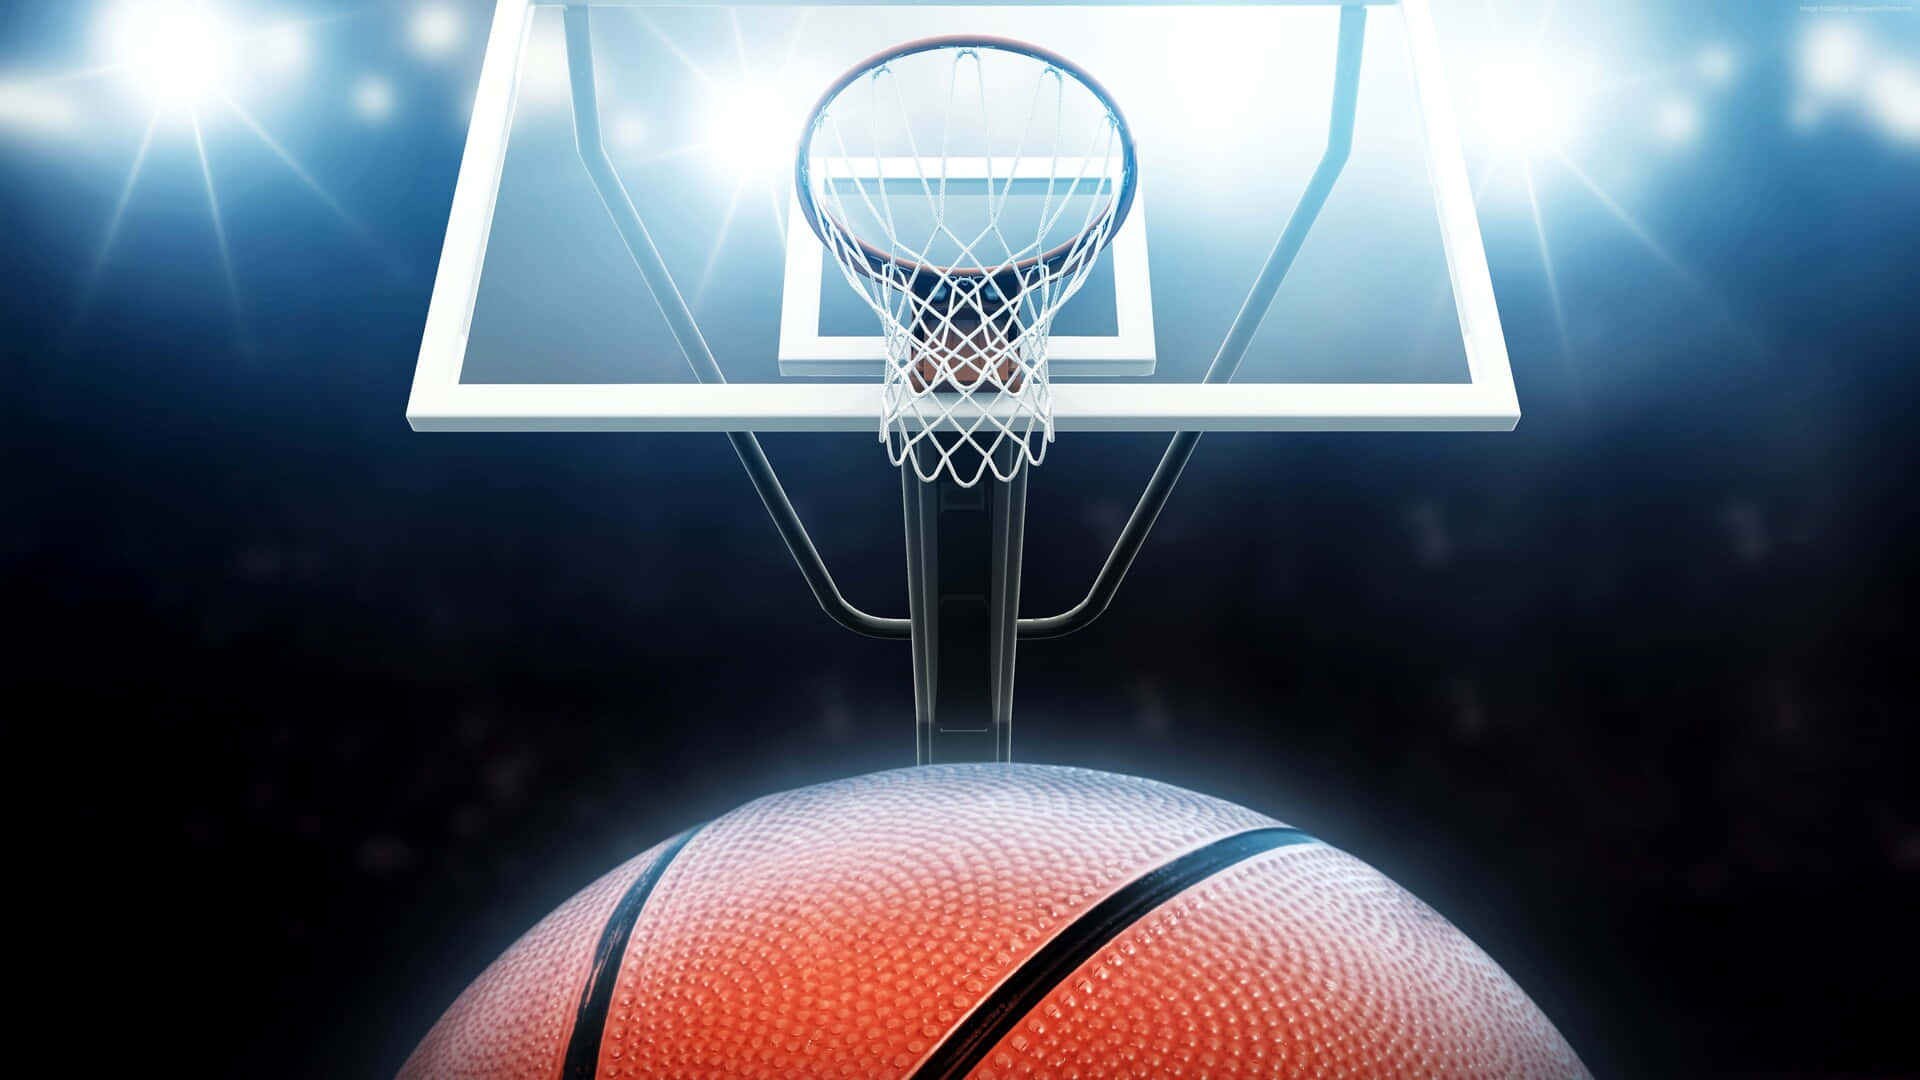 Show off your Basketball Skills with a 1080p Basketball Background